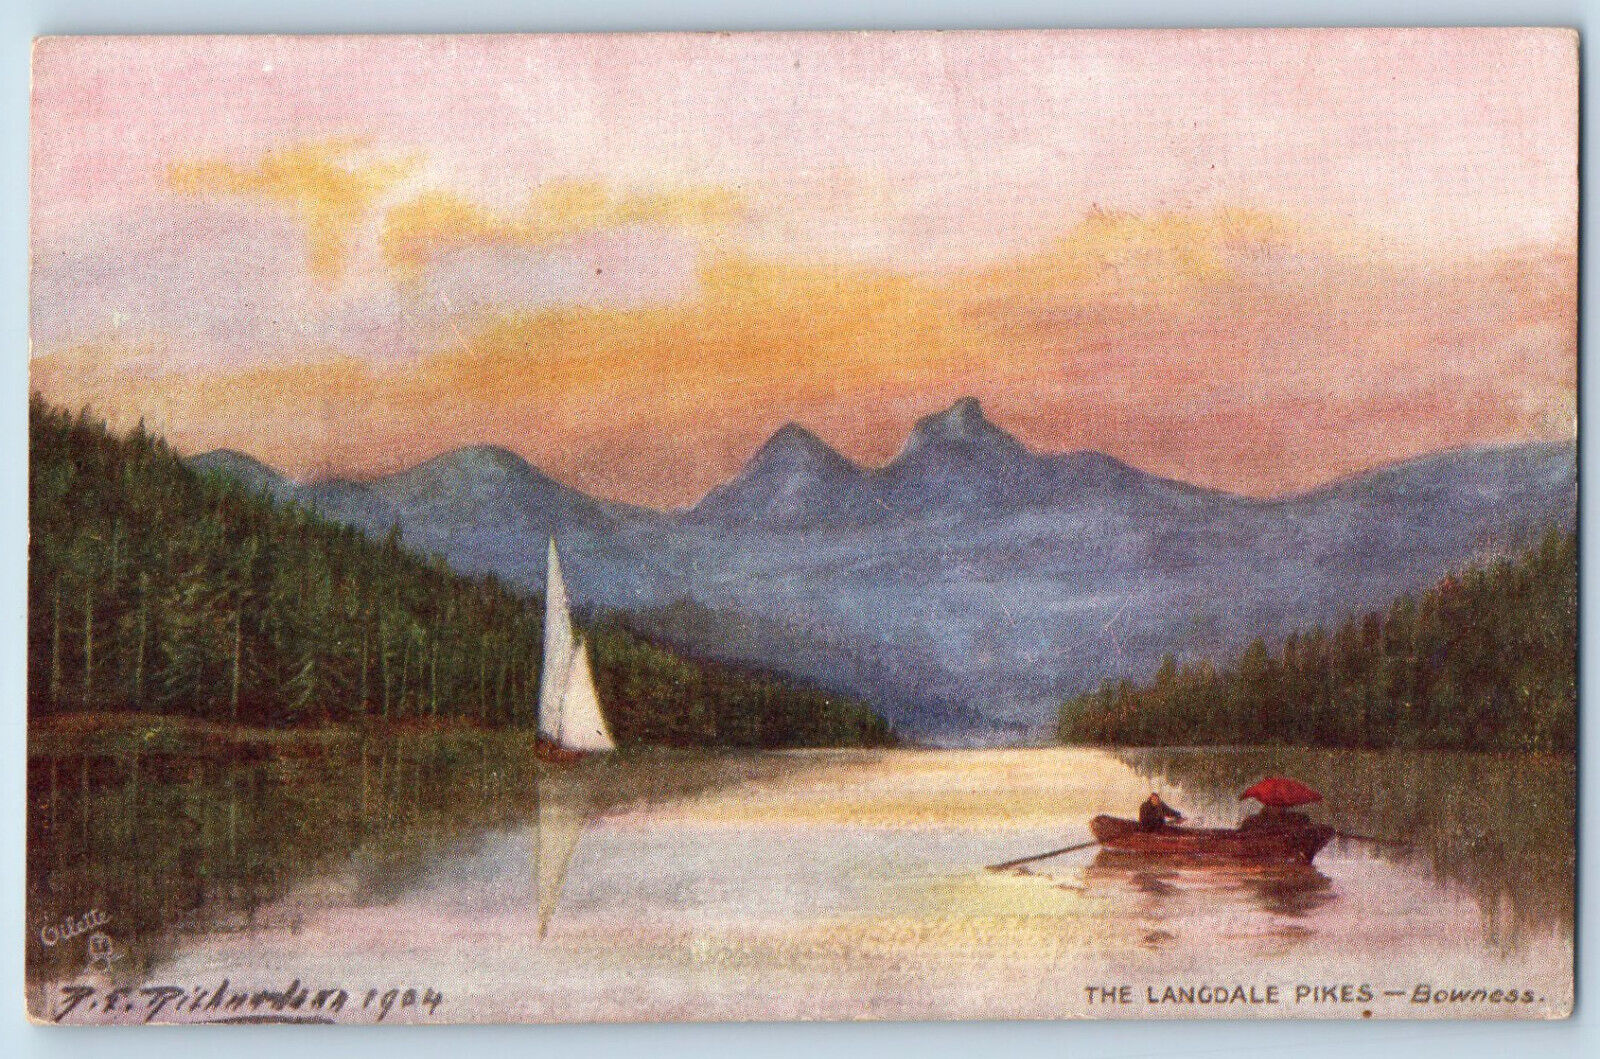 Bowness-on-Windermere England Postcard Langdale Pikes 1904 Oilette Tuck Art